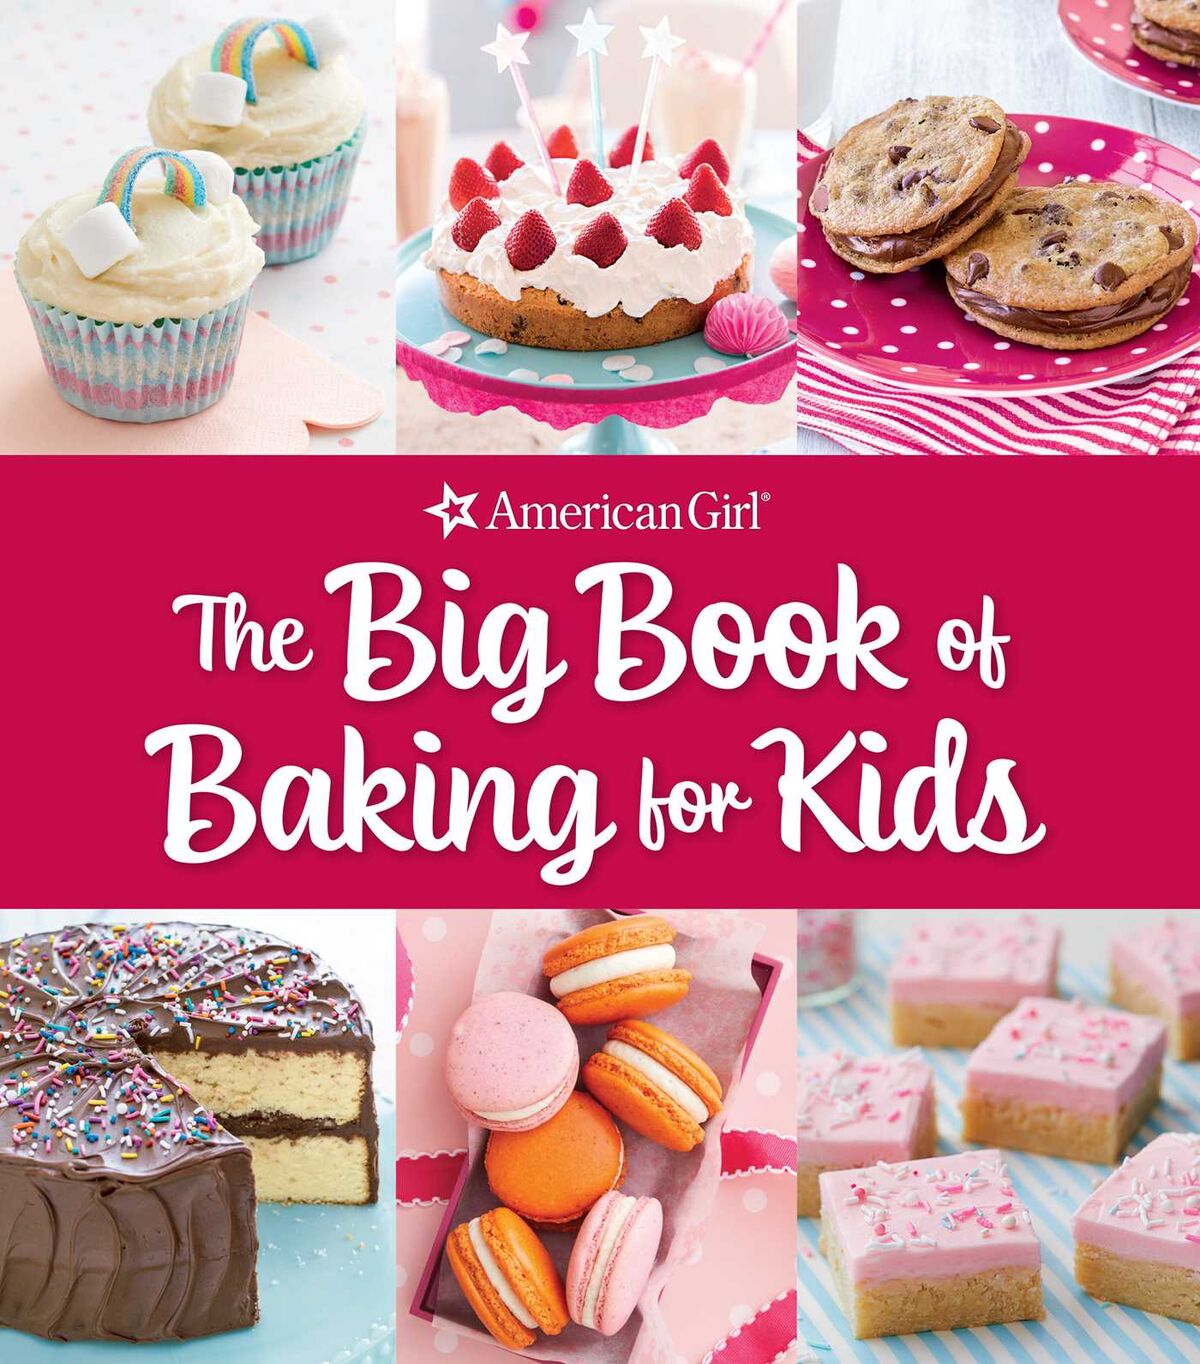 Molly's Cooking Studio, American Girl Wiki